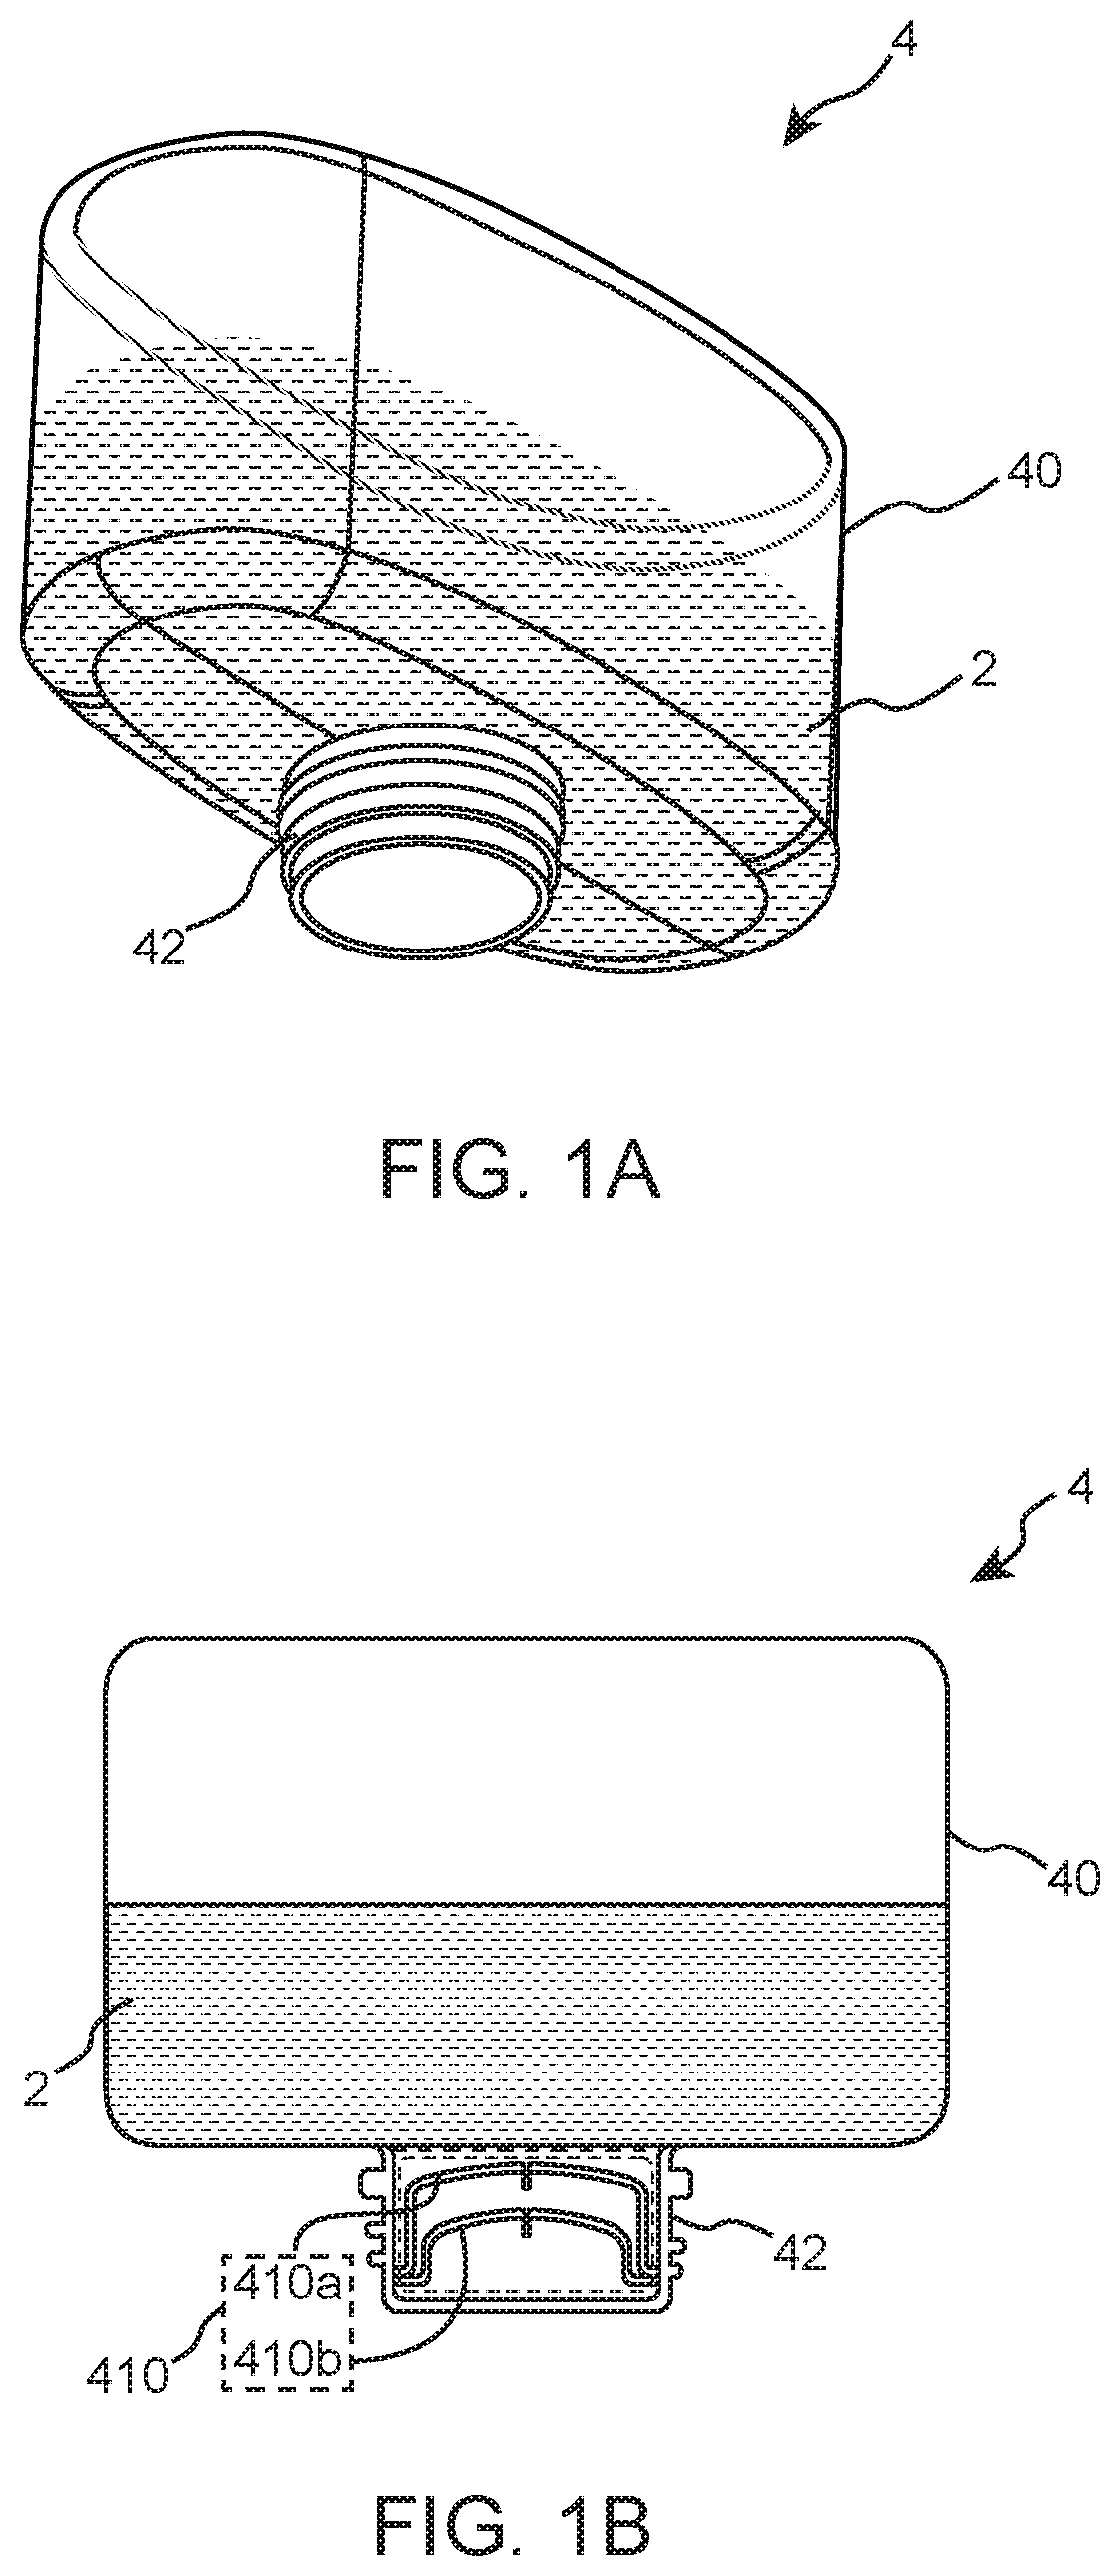 Cartridge and a base unit for use in an oral care appliance